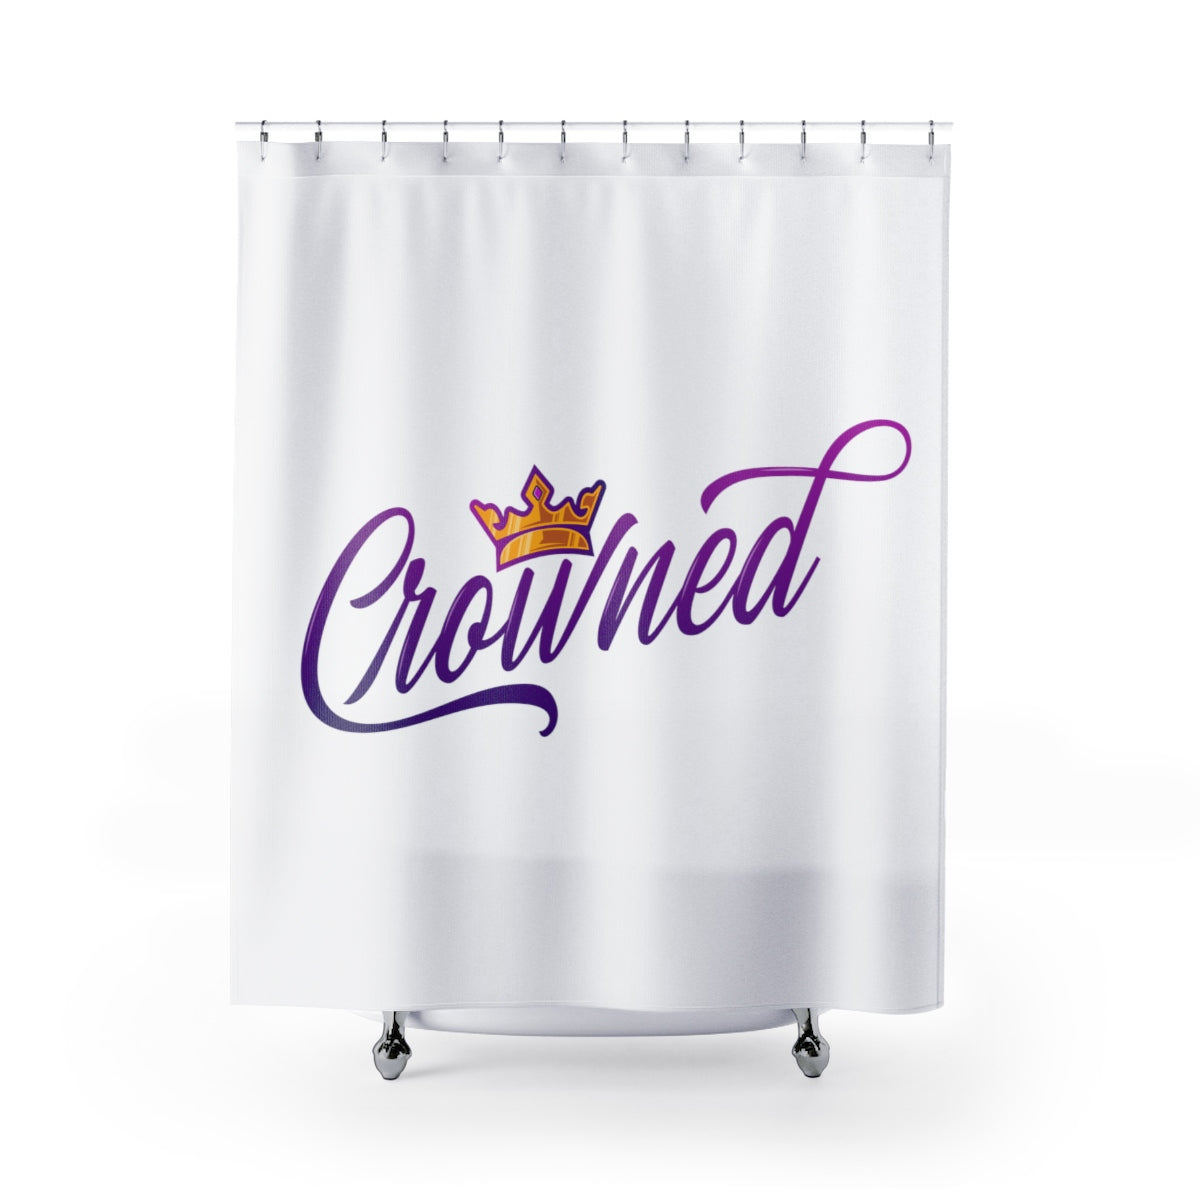 Crowned Shower Curtains